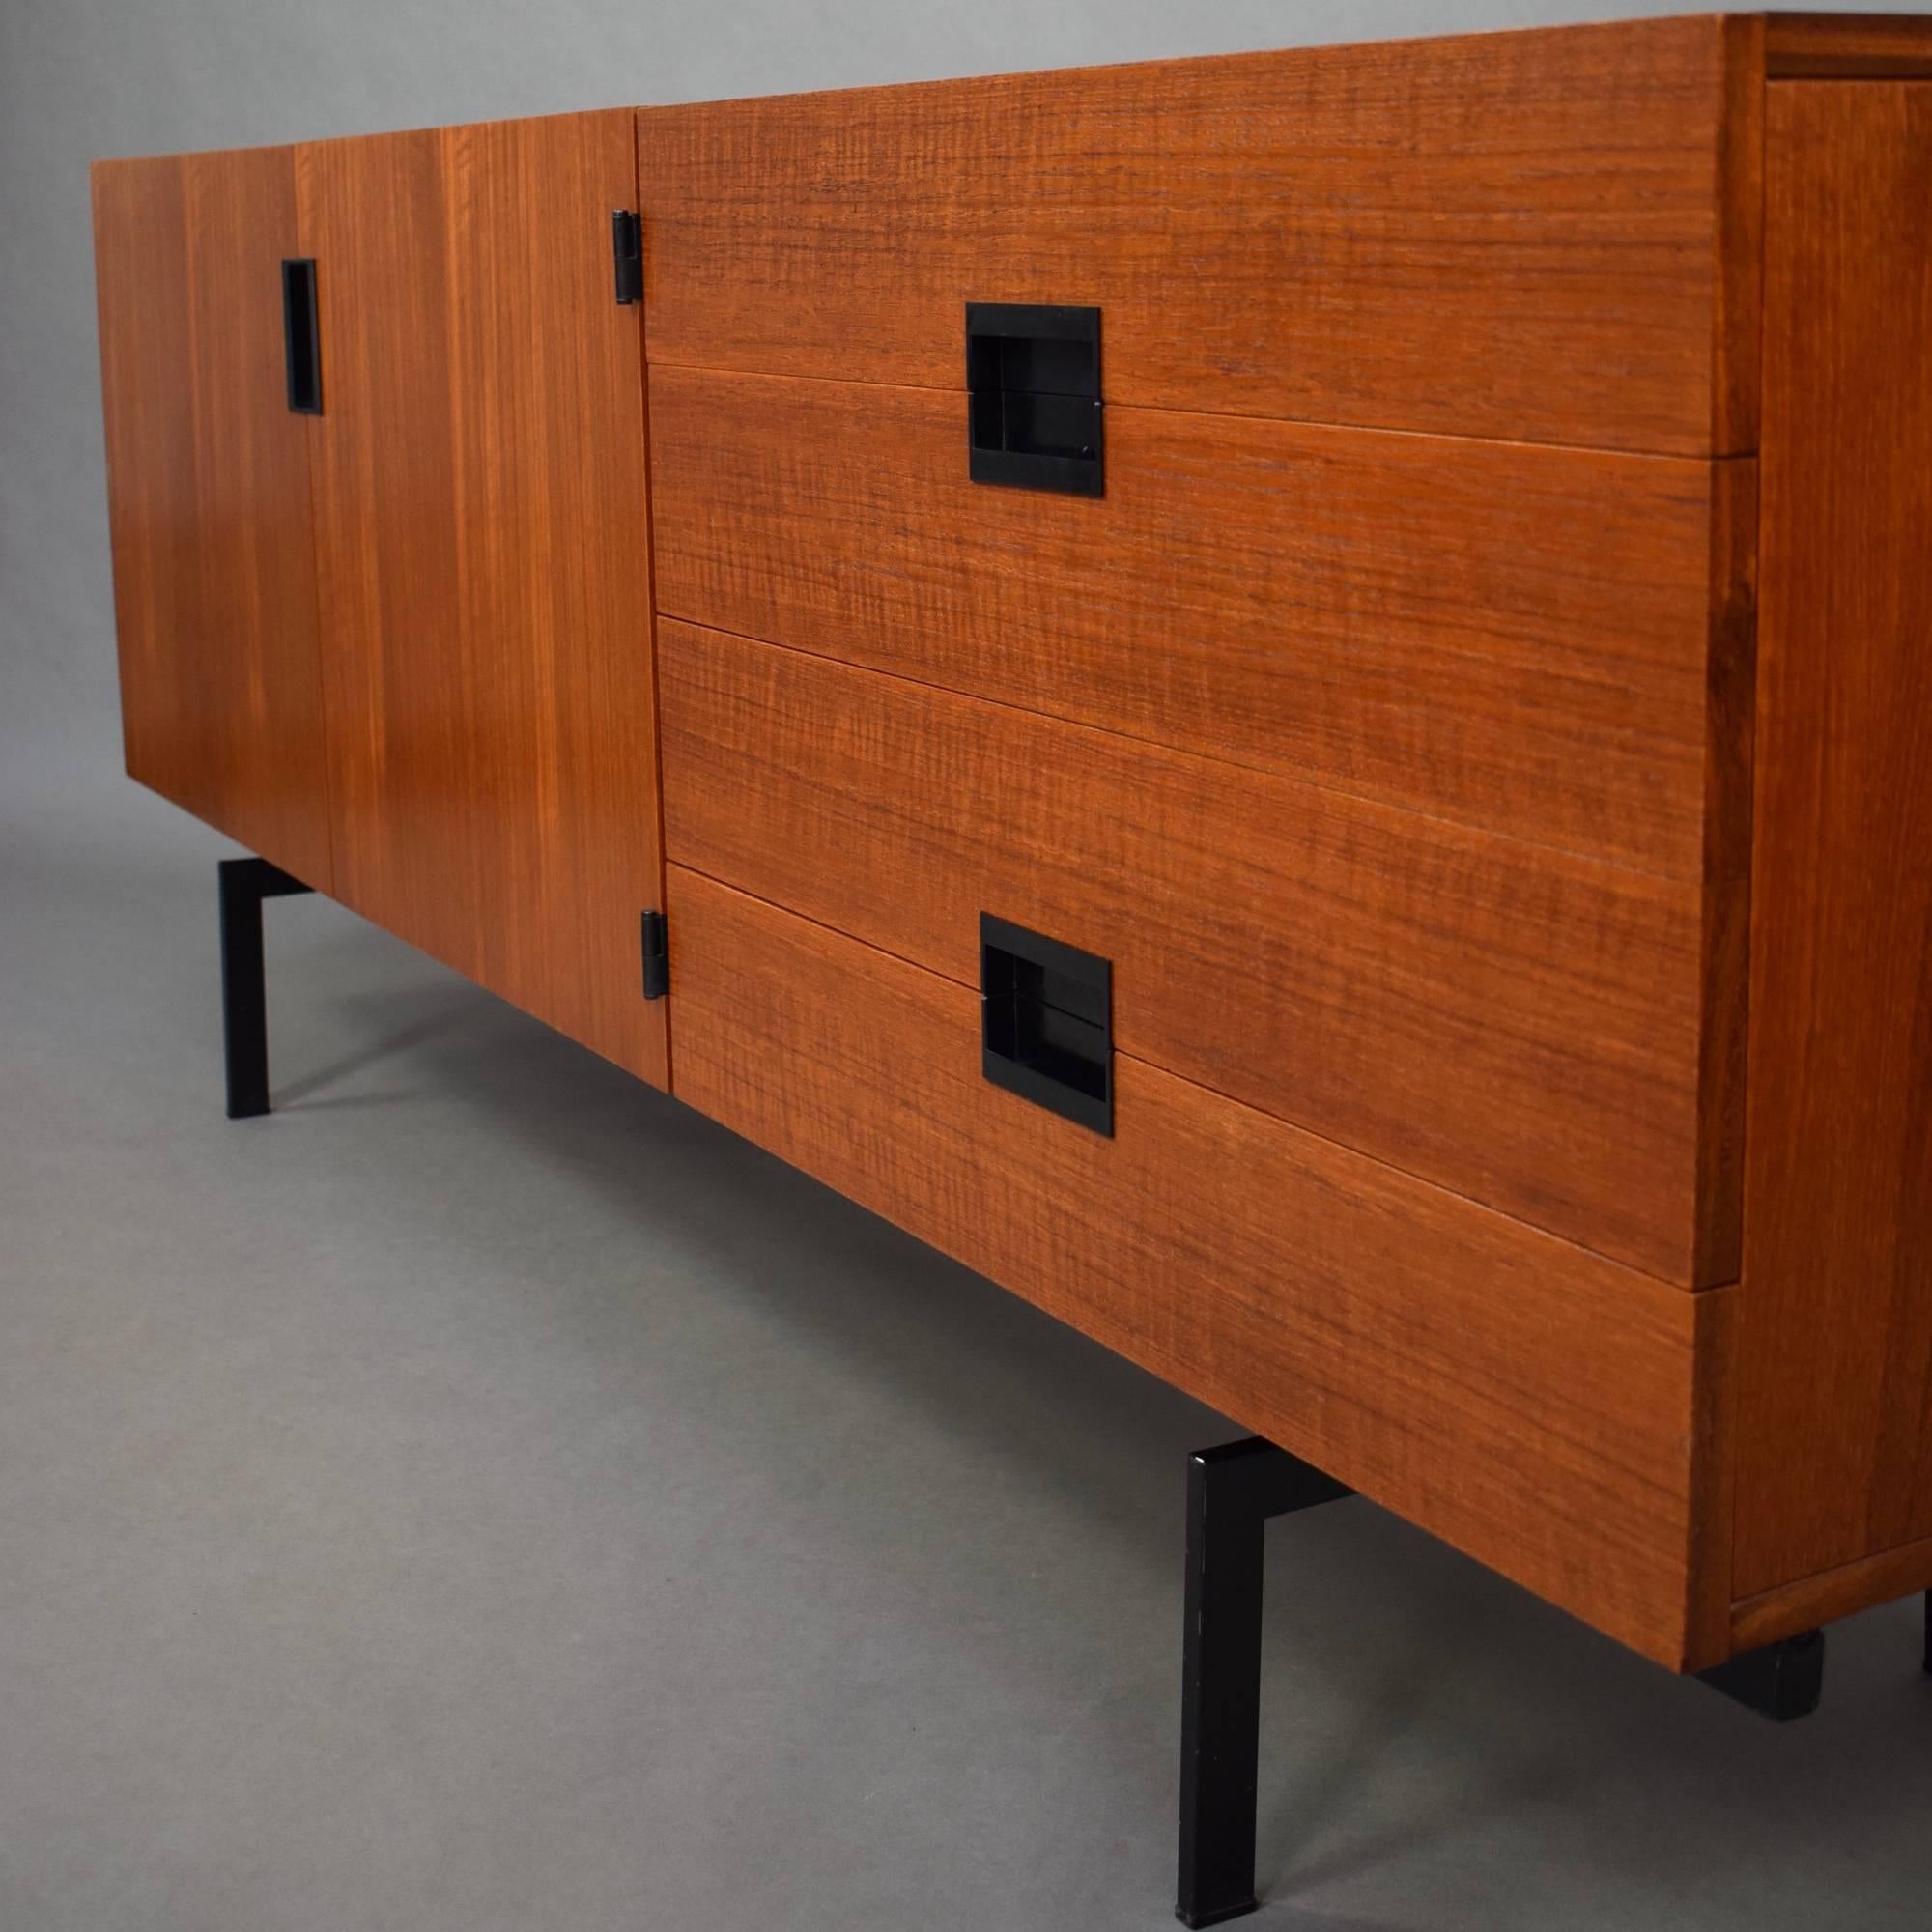 Mid-20th Century Japanese Series Sideboard Model DU04 by Cees Braakman for Pastoe, circa 1950